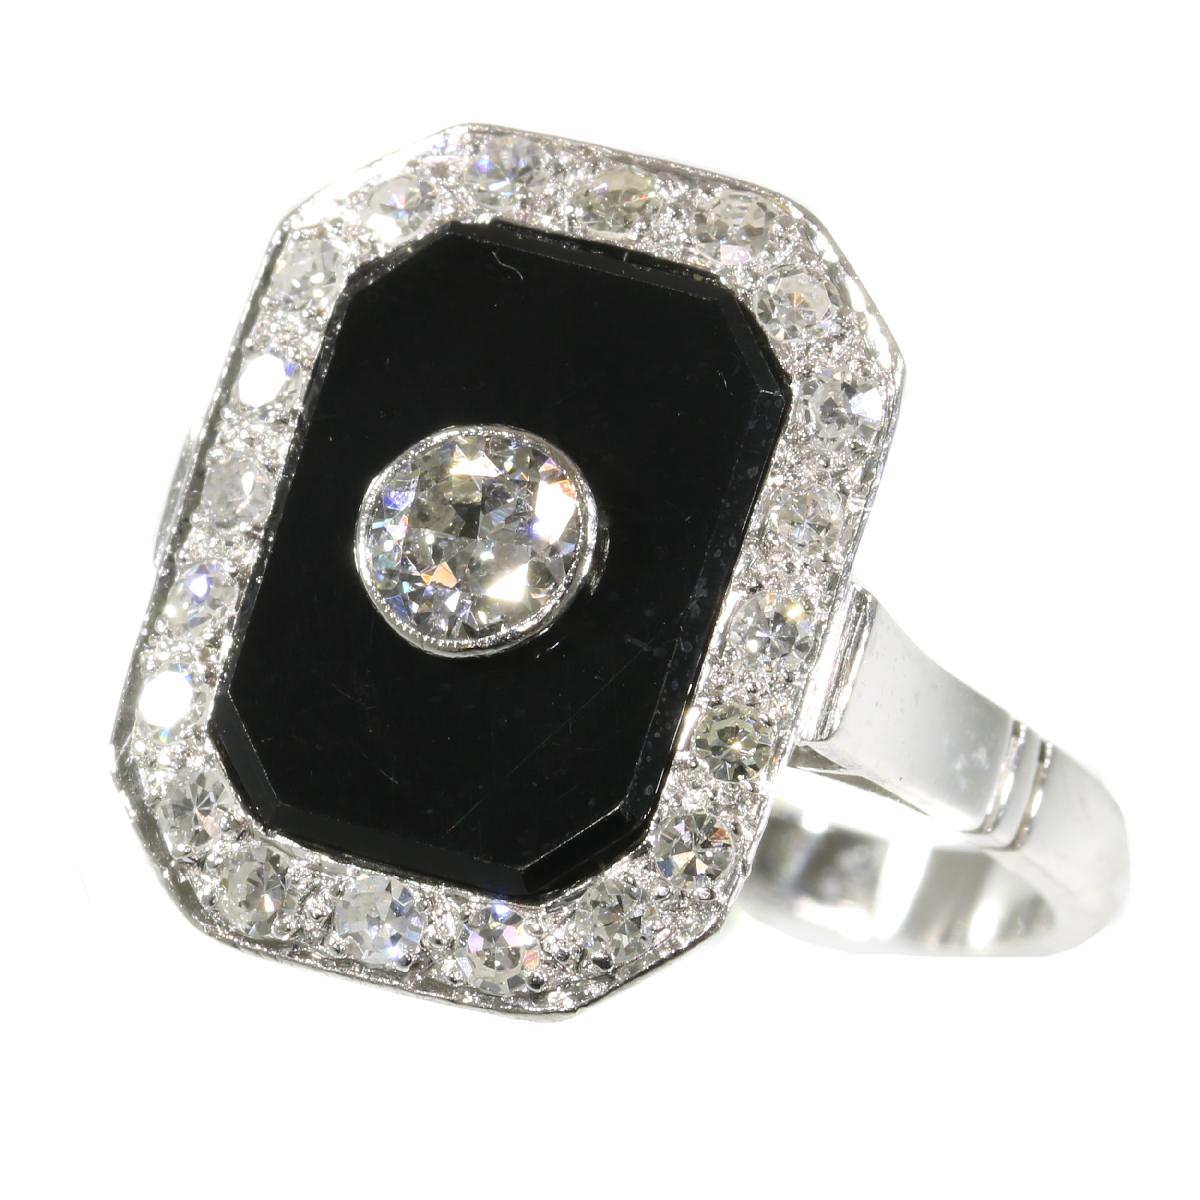 Vintage Platinum Art Deco Style Diamond and Onyx Ring from the 1950s